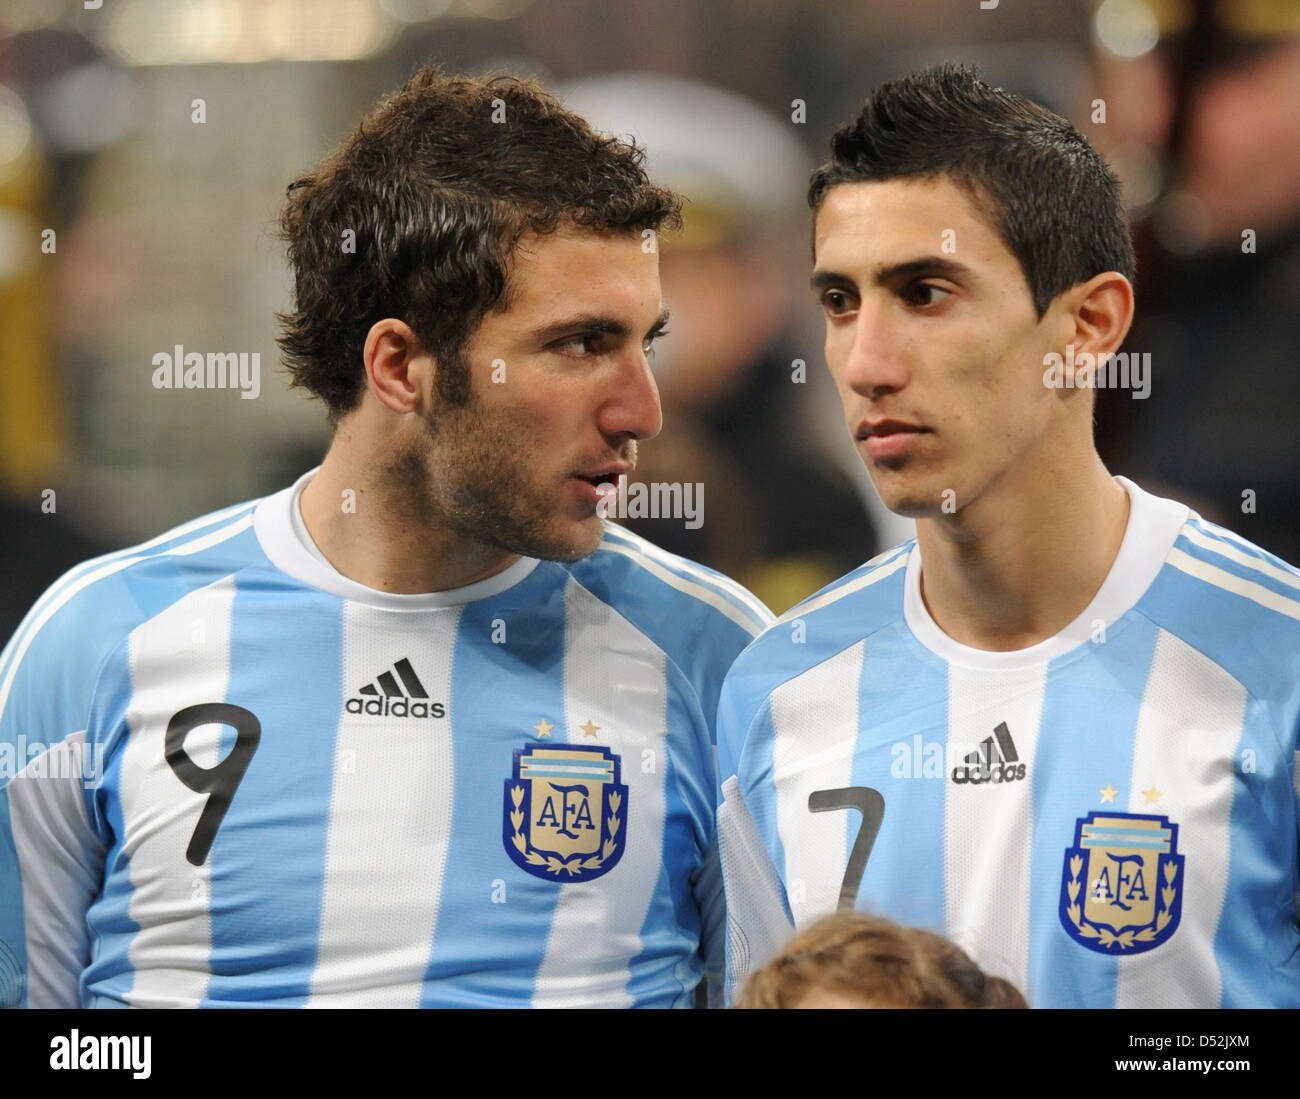 Argentina's Gonzalo Higuain (L) and Angel Di Maria (R) pictured prior to the soccer test match Germany vs Argentina at AllianzArena stadium in Munich, Germany, 03 March 2010. Argentina won the match 1-0. Photo: Bernd Weissbrod Stock Photo